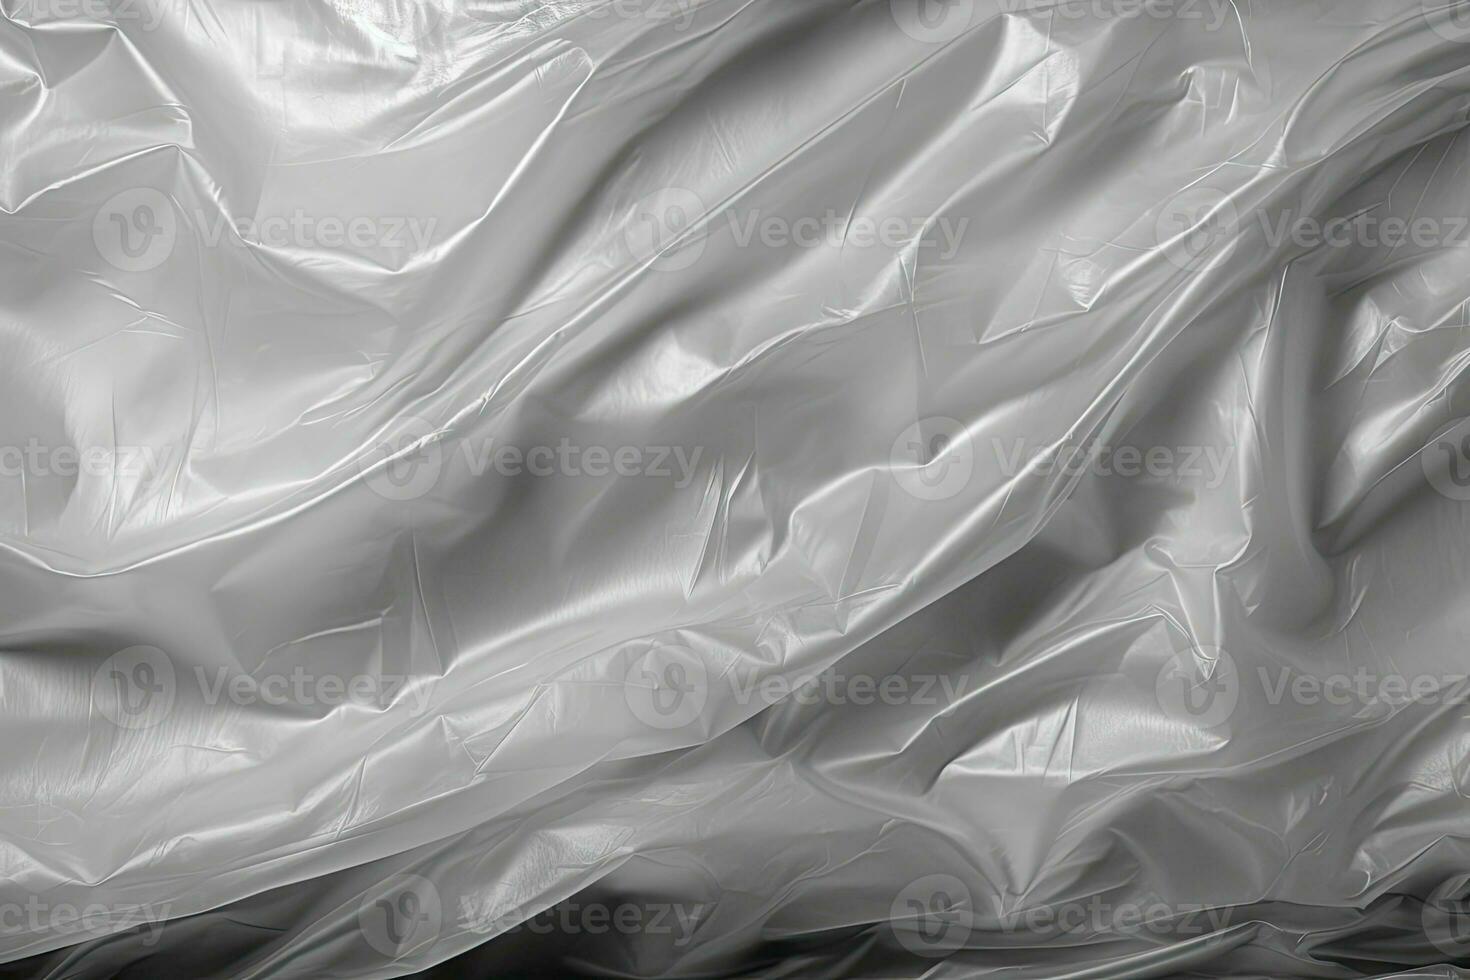 gradient gray plastic wrap overlay backdrop. crumpled and draped textured cellophane material photo